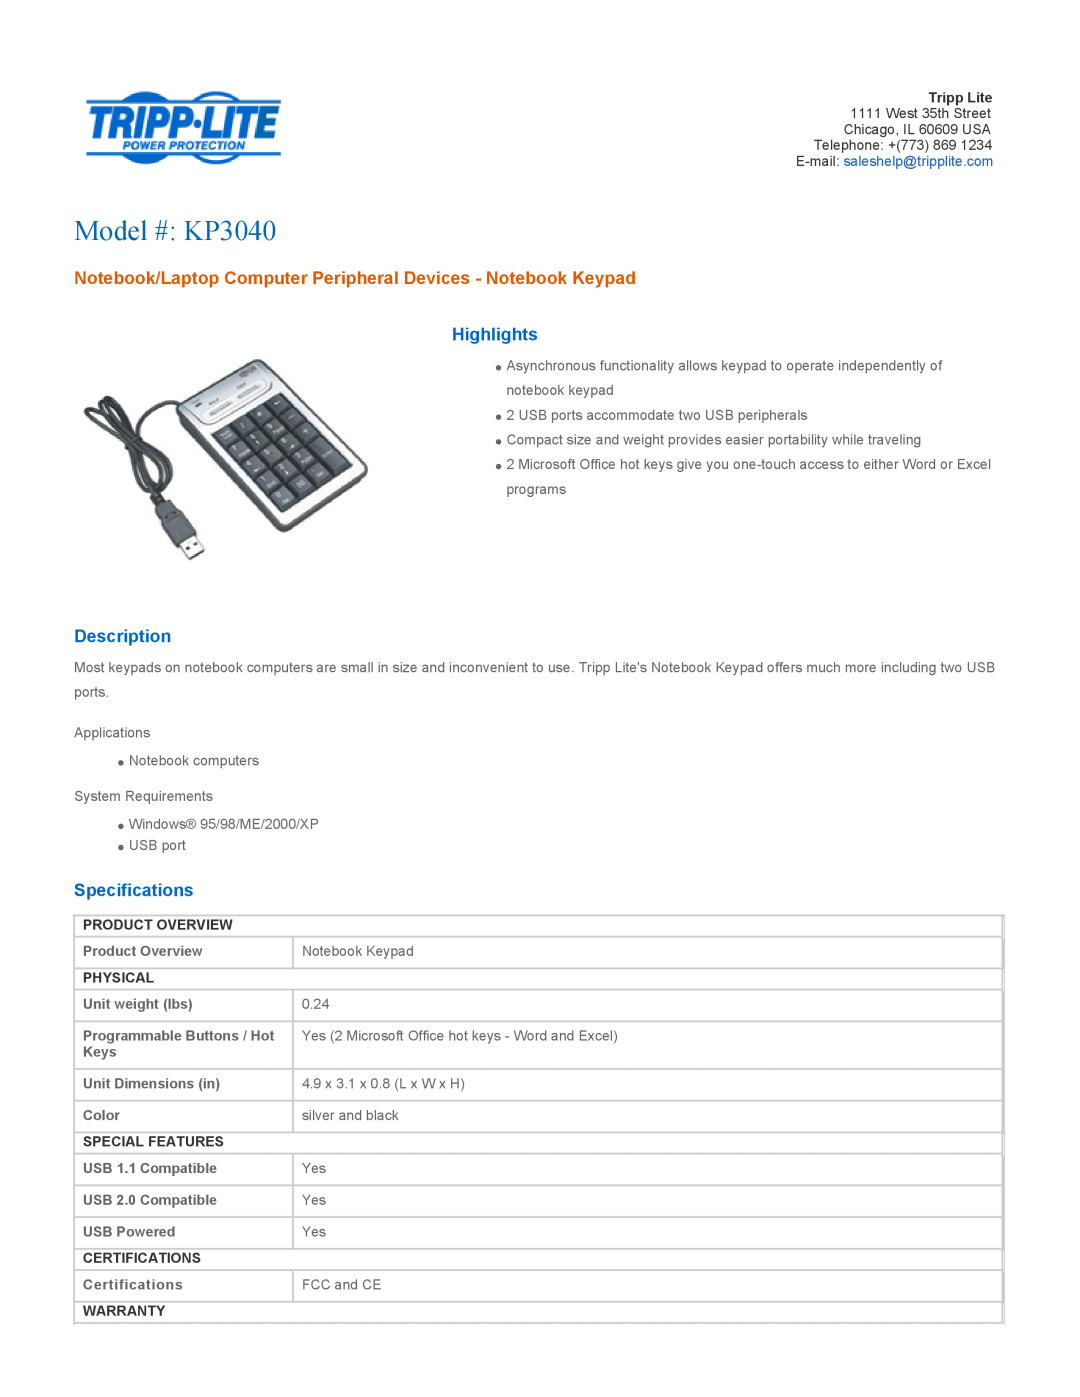 Tripp Lite specifications Model # KP3040, Notebook/Laptop Computer Peripheral Devices - Notebook Keypad, Highlights 